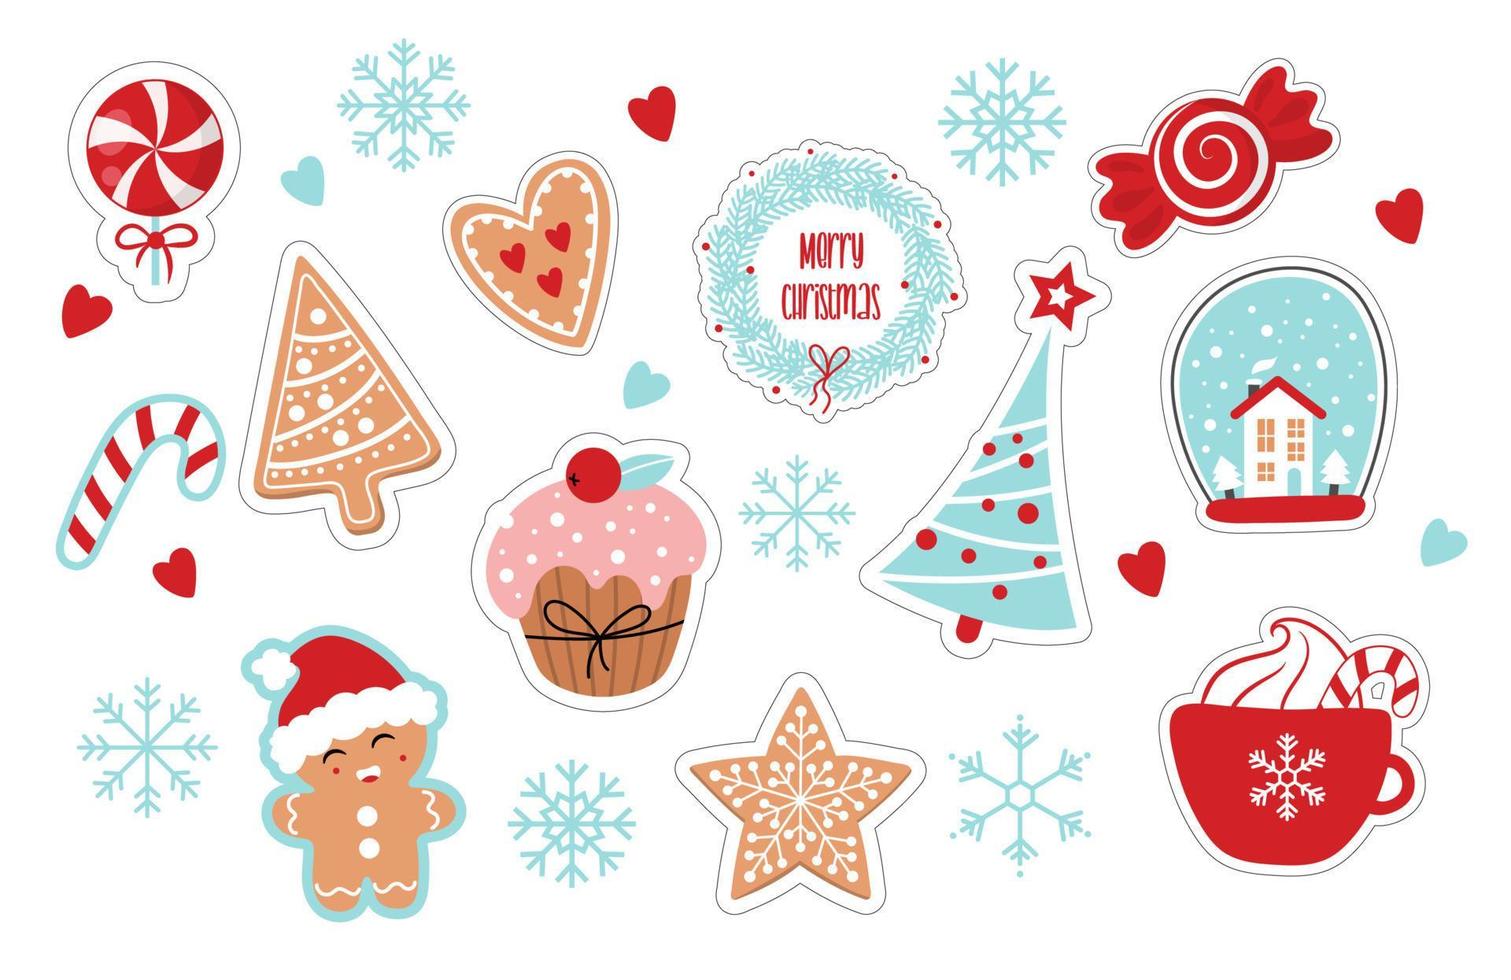 Collection of stickers with decorations, holiday gifts, gingerbread, cookies, candies, gingerbread man, lollipops, cup of hot chocolate or cocoa. Colorful vector illustration in flat cartoon style